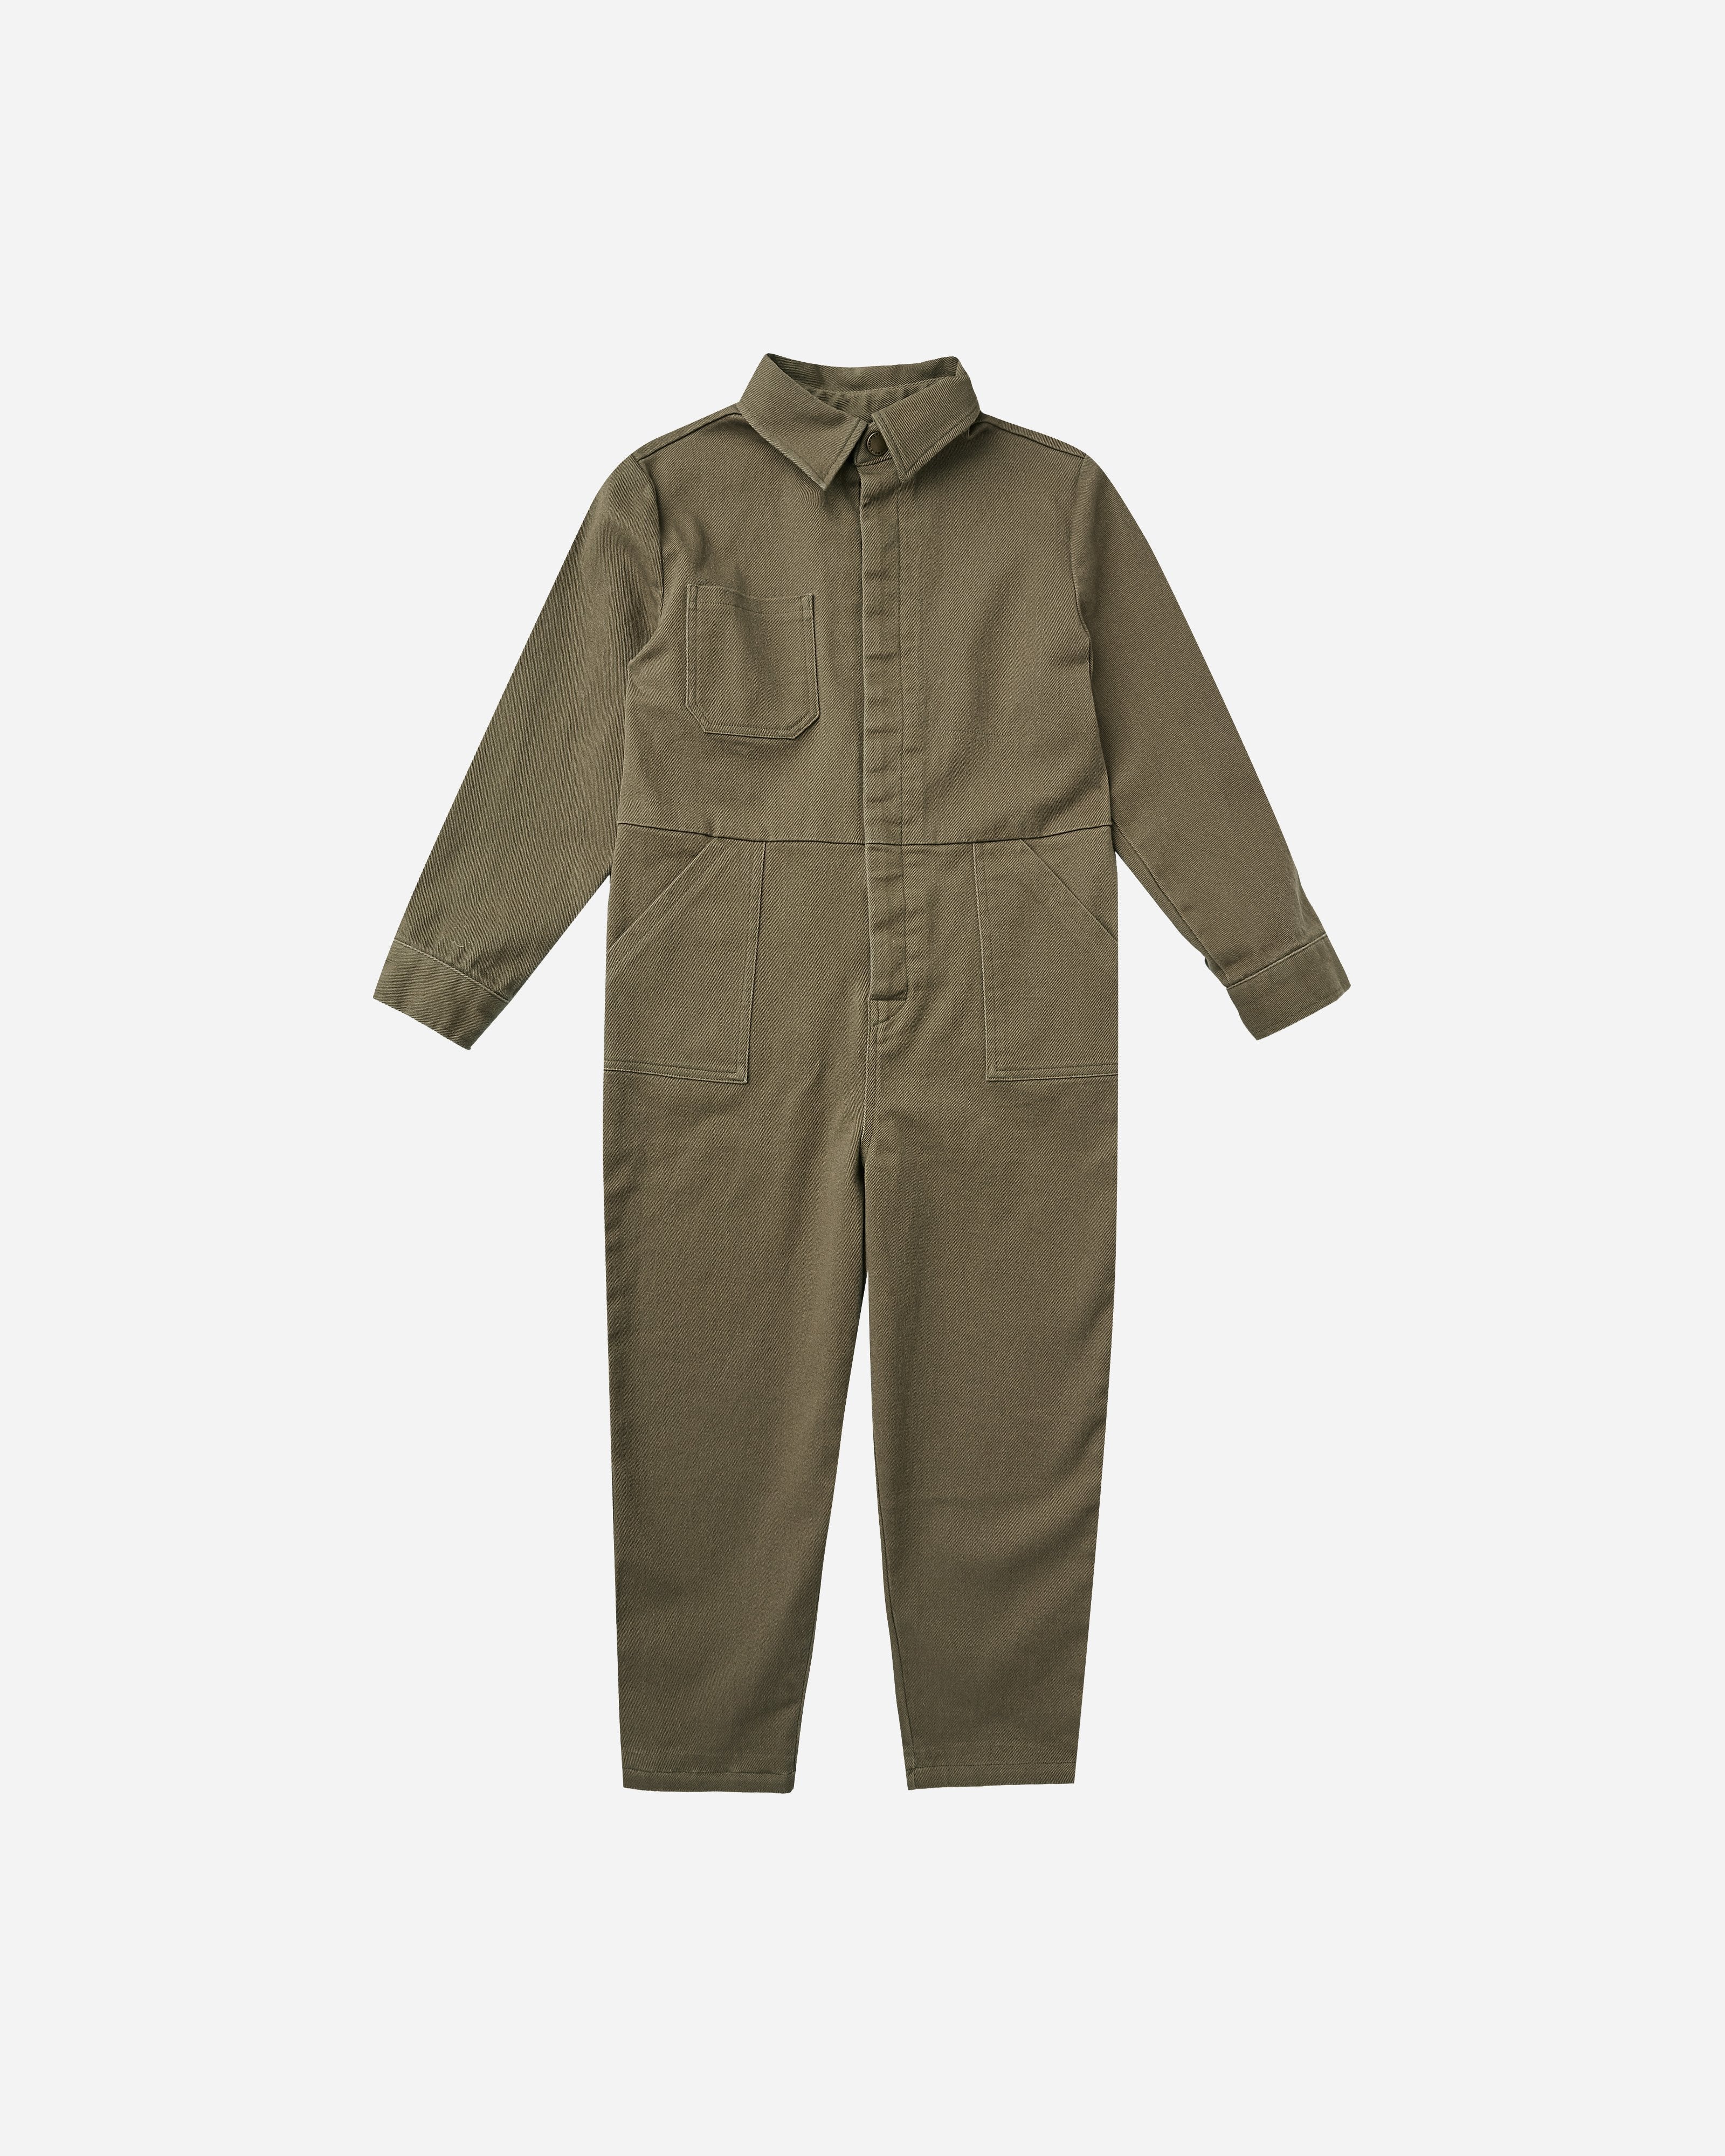 The Coverall Jumpsuit by Rylee & Cru - Olive - KIDS